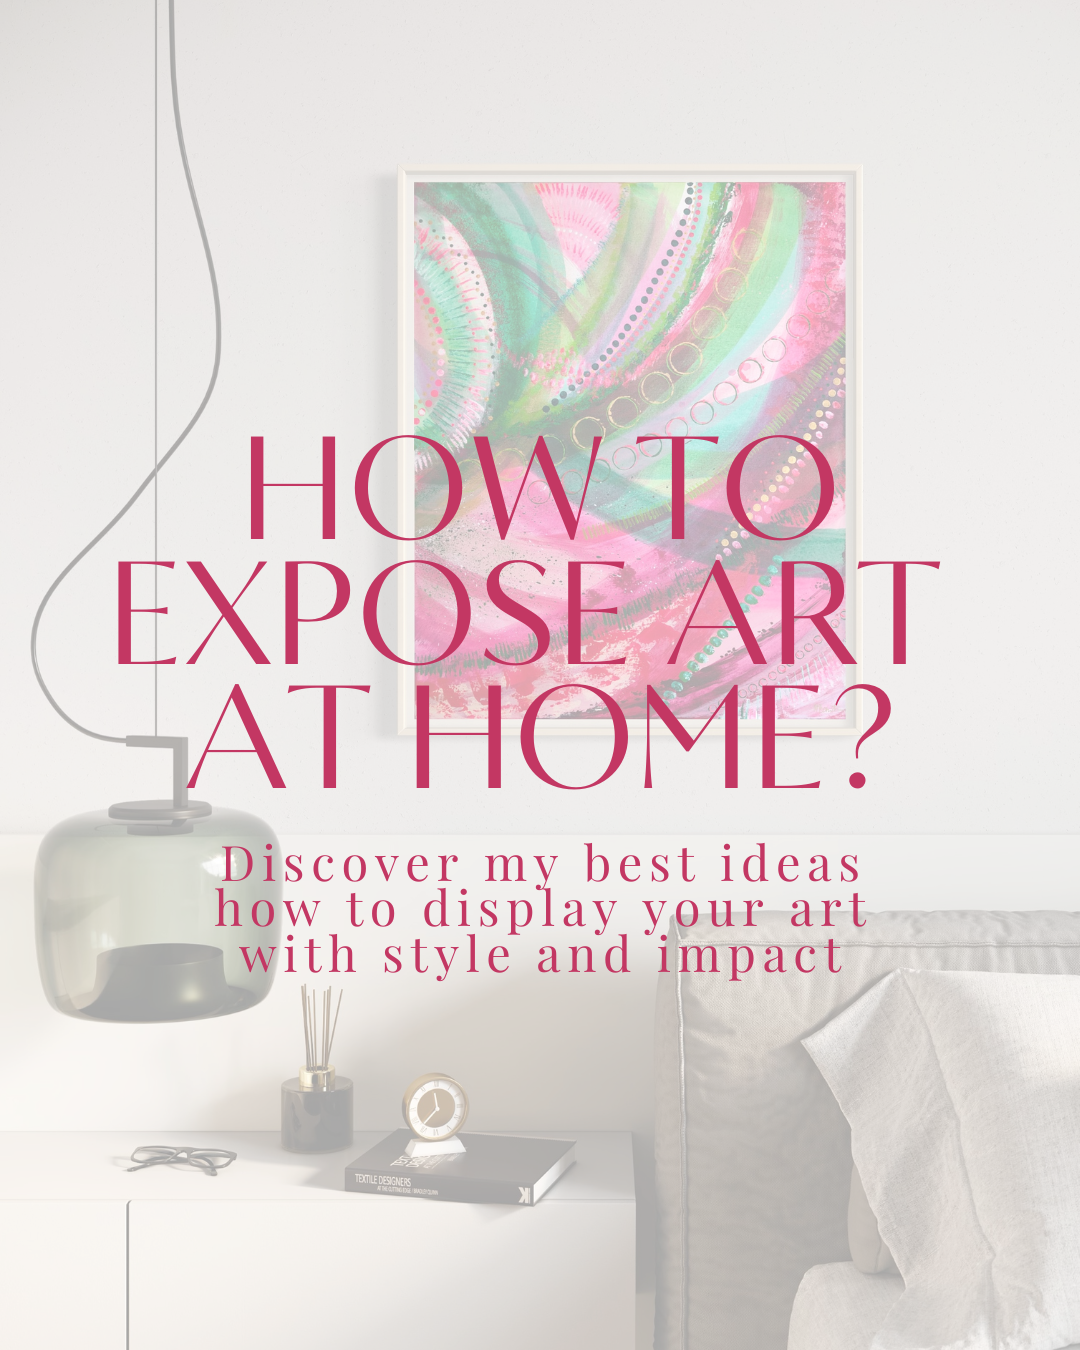 How to Expose Art at Home: Discover 5 Useful Tips to Display Your Art with Style and Impact